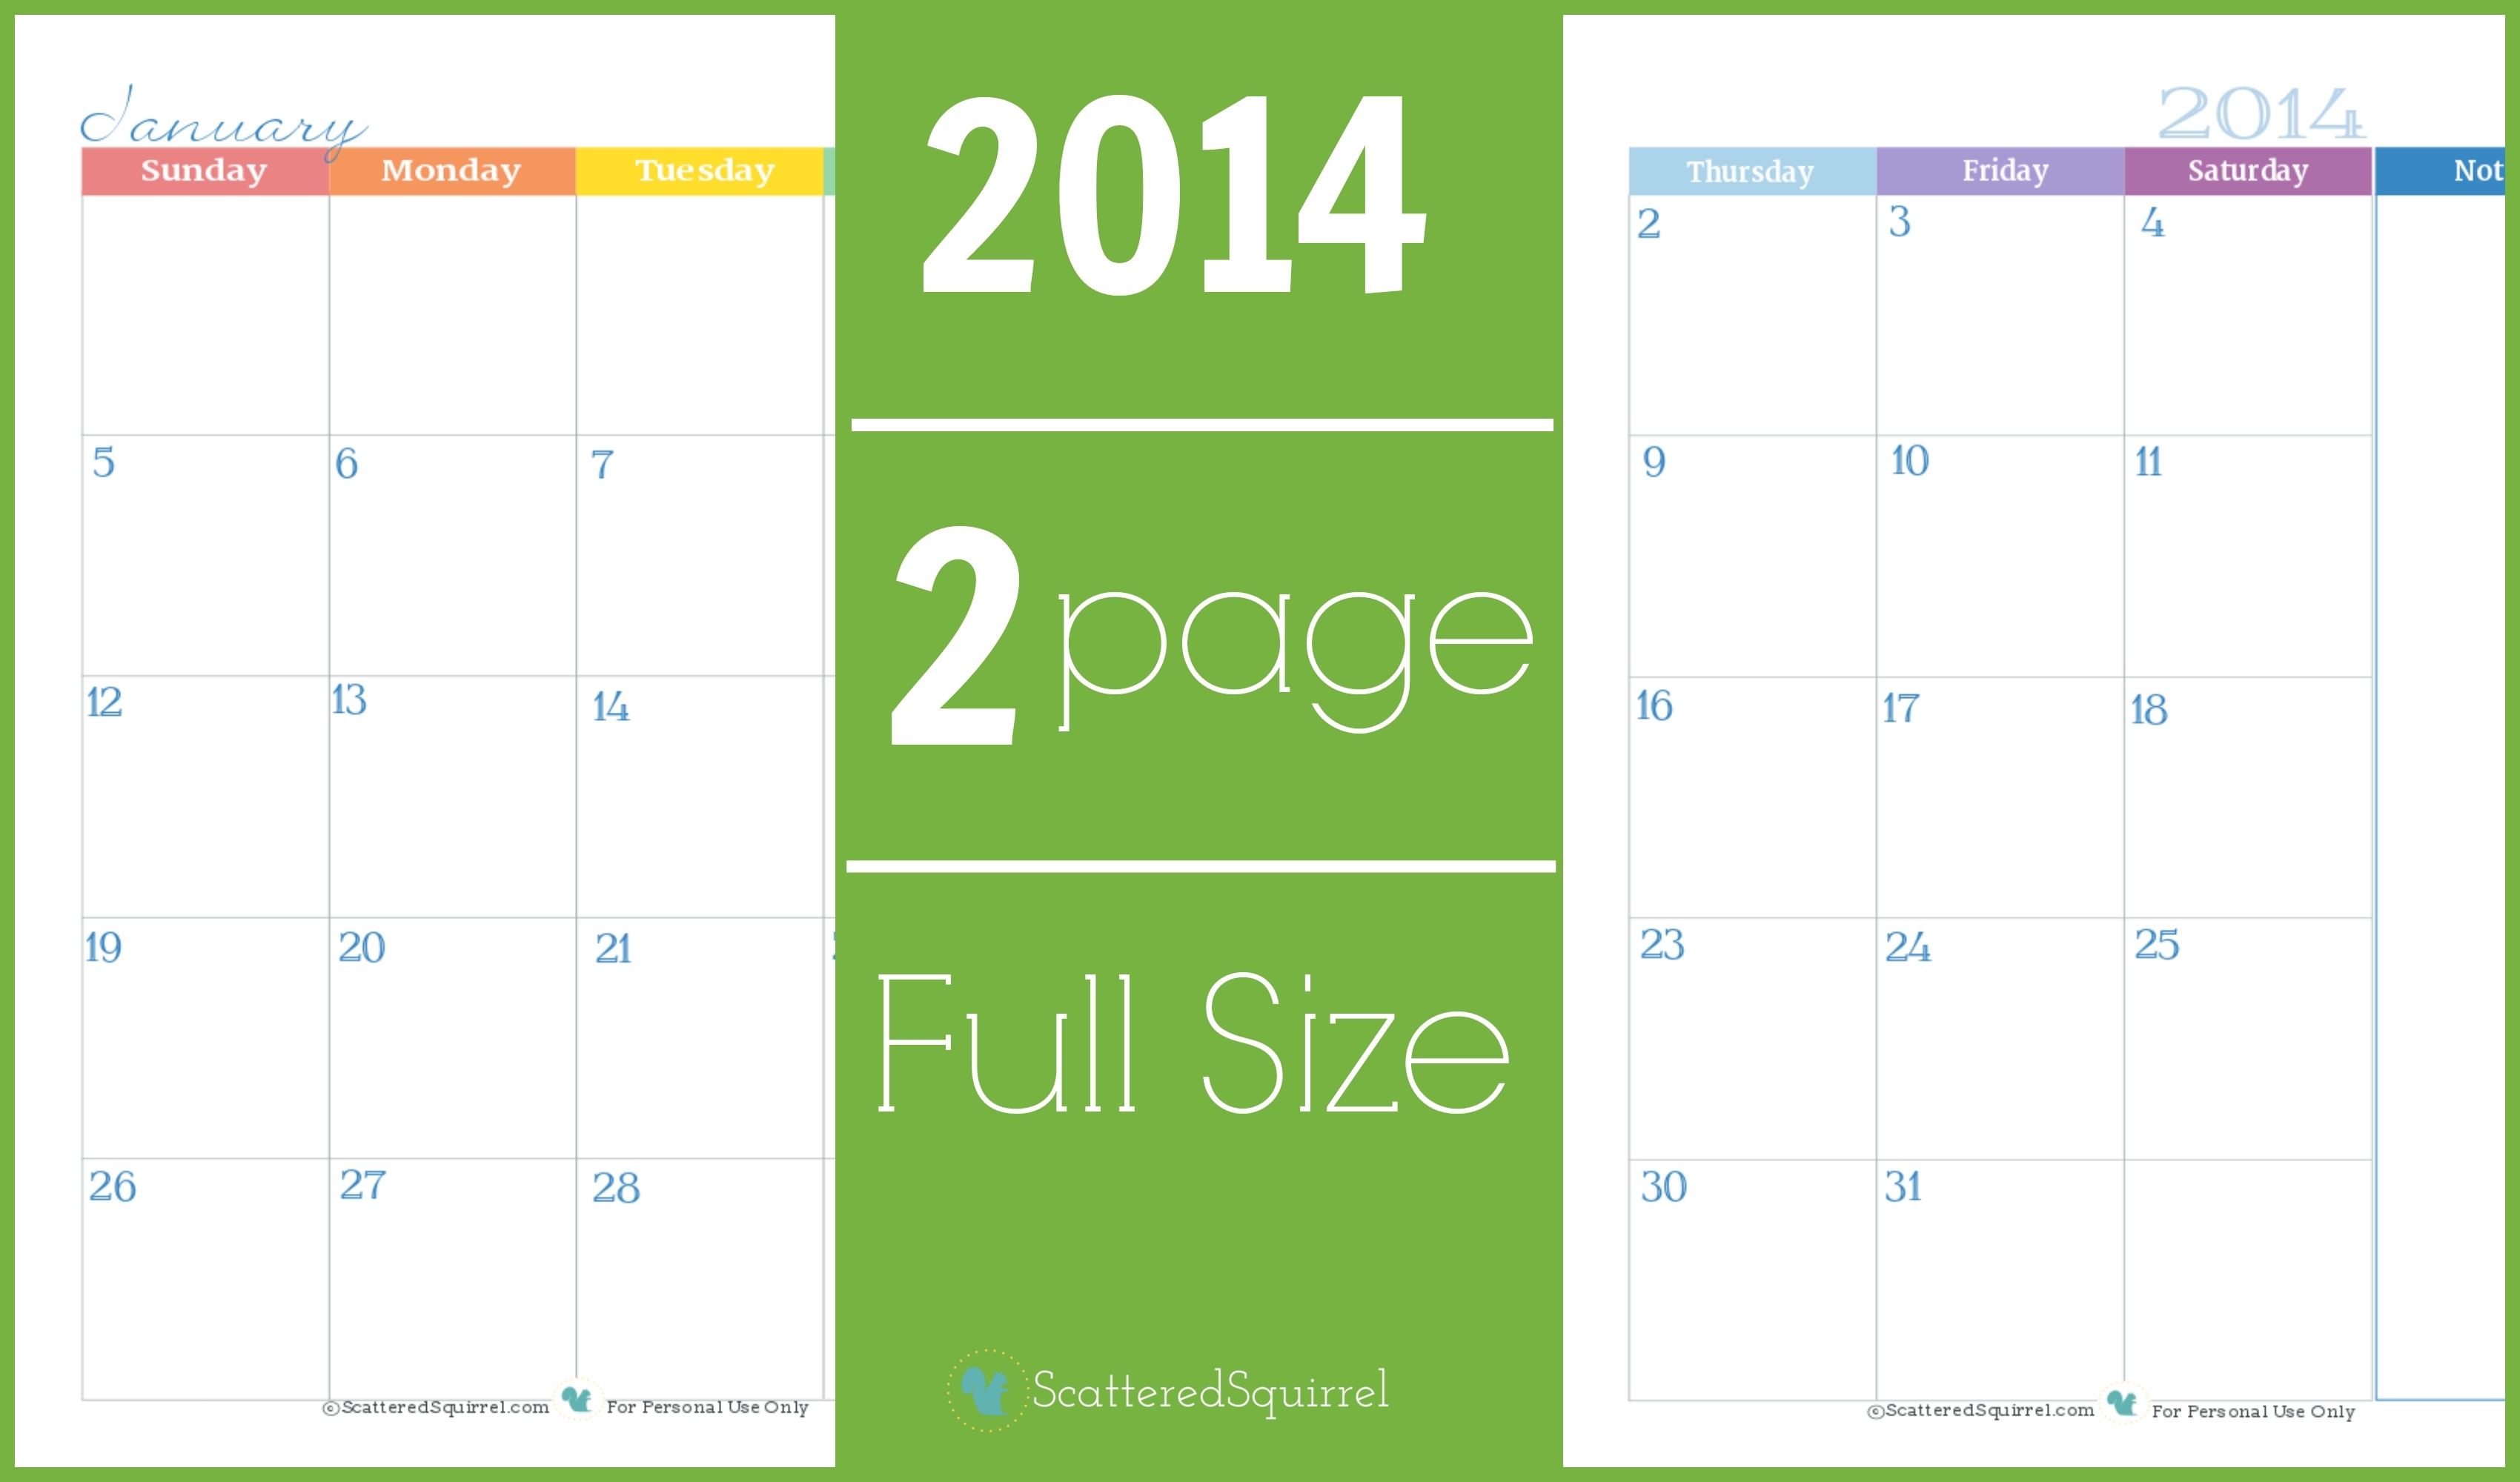 2014 Calendar: Two Page Monthly - Scattered Squirrel